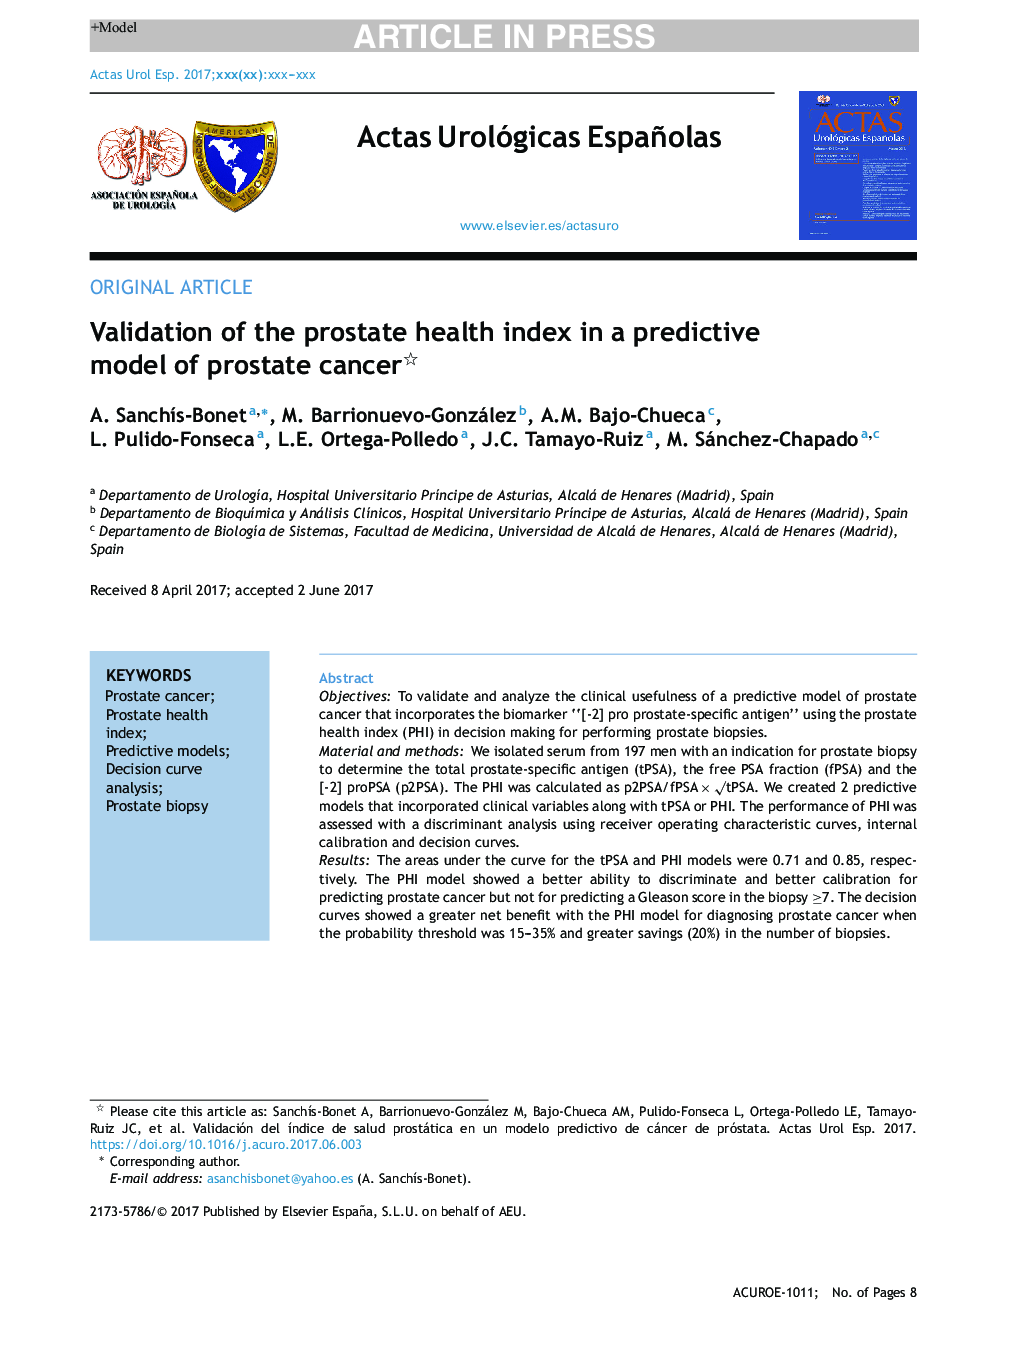 Validation of the prostate health index in a predictive model of prostate cancer